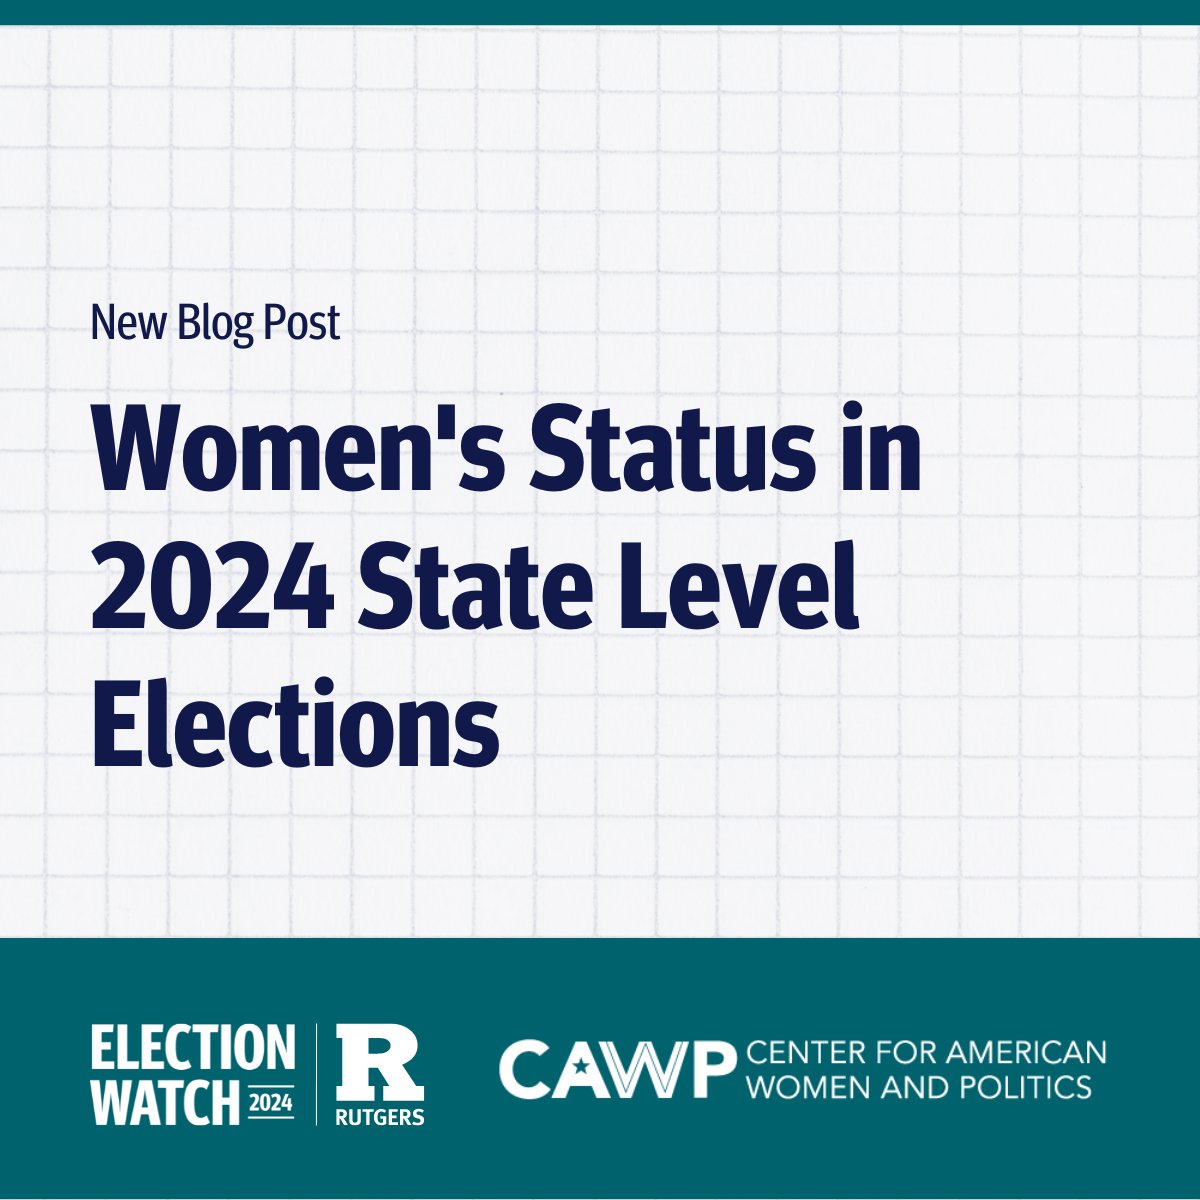 Last week, CAWP Director of Research @kdittmar released a new analysis of state level candidacies in election 2024. Here's what she discovered: cawp.rutgers.edu/blog/womens-st…